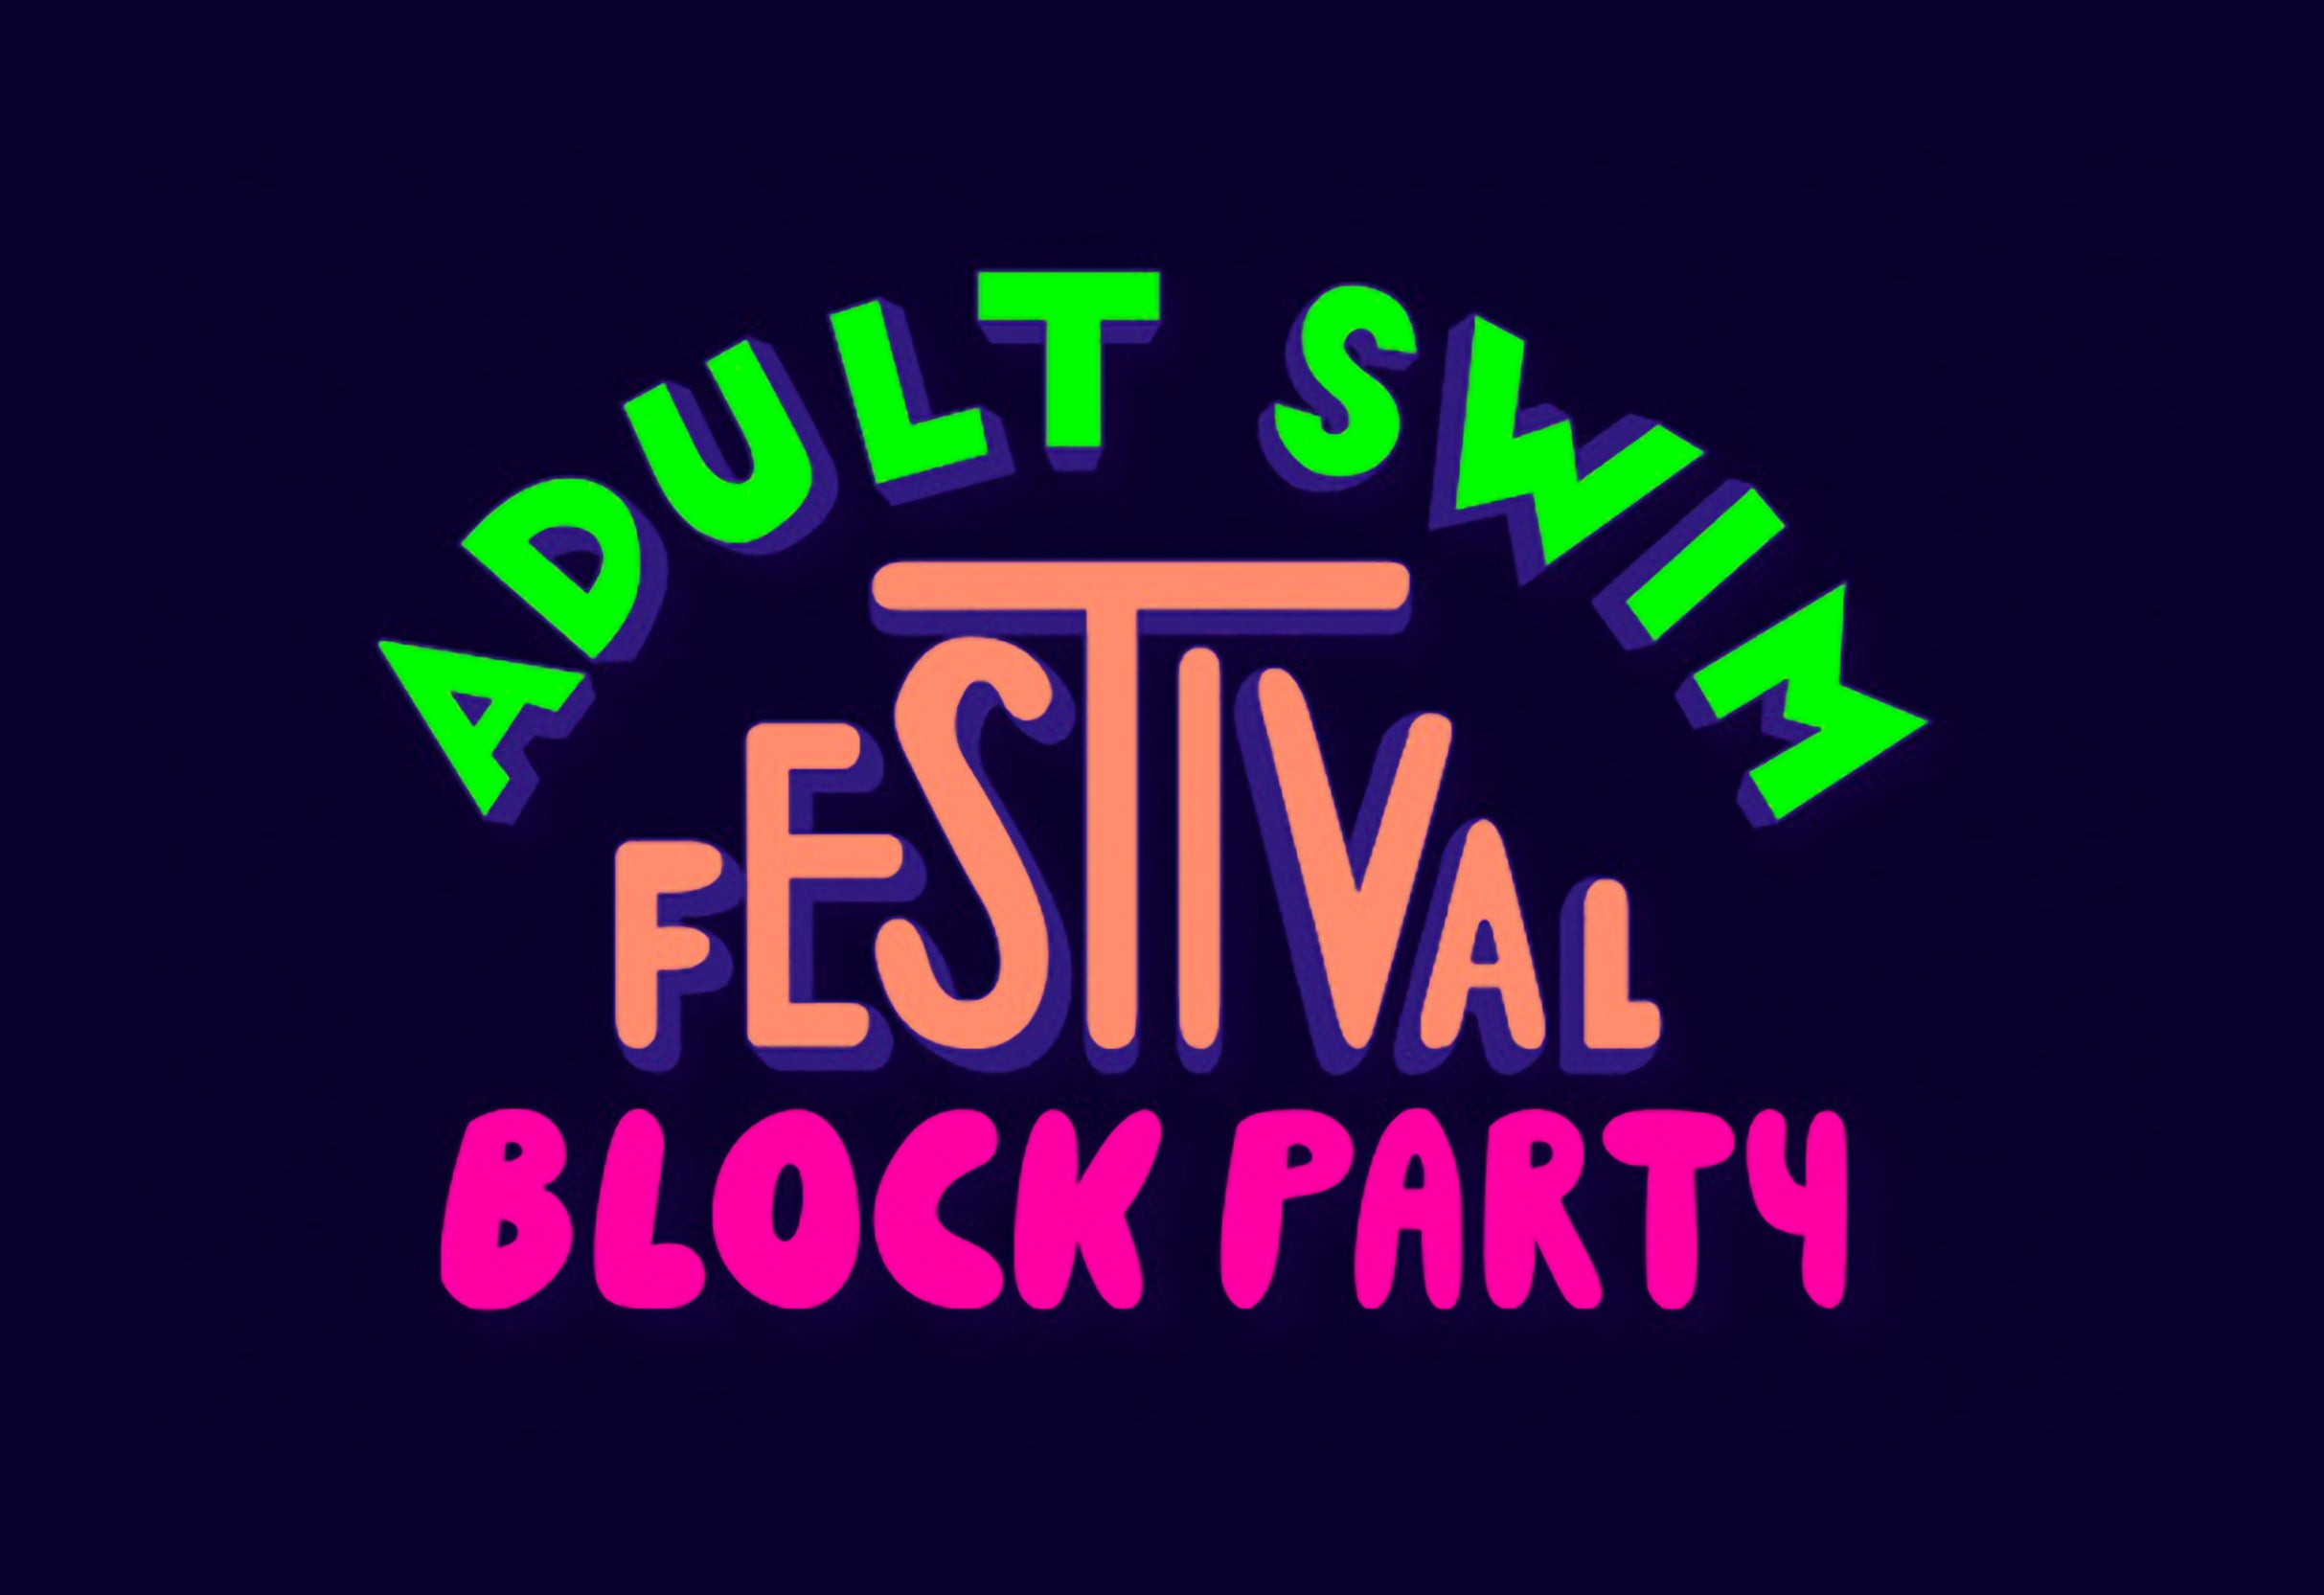 Sam Jay with special guest Jak Knight -Adult Swim Festival Block Party in Philadelphia promo photo for Live Nation presale offer code